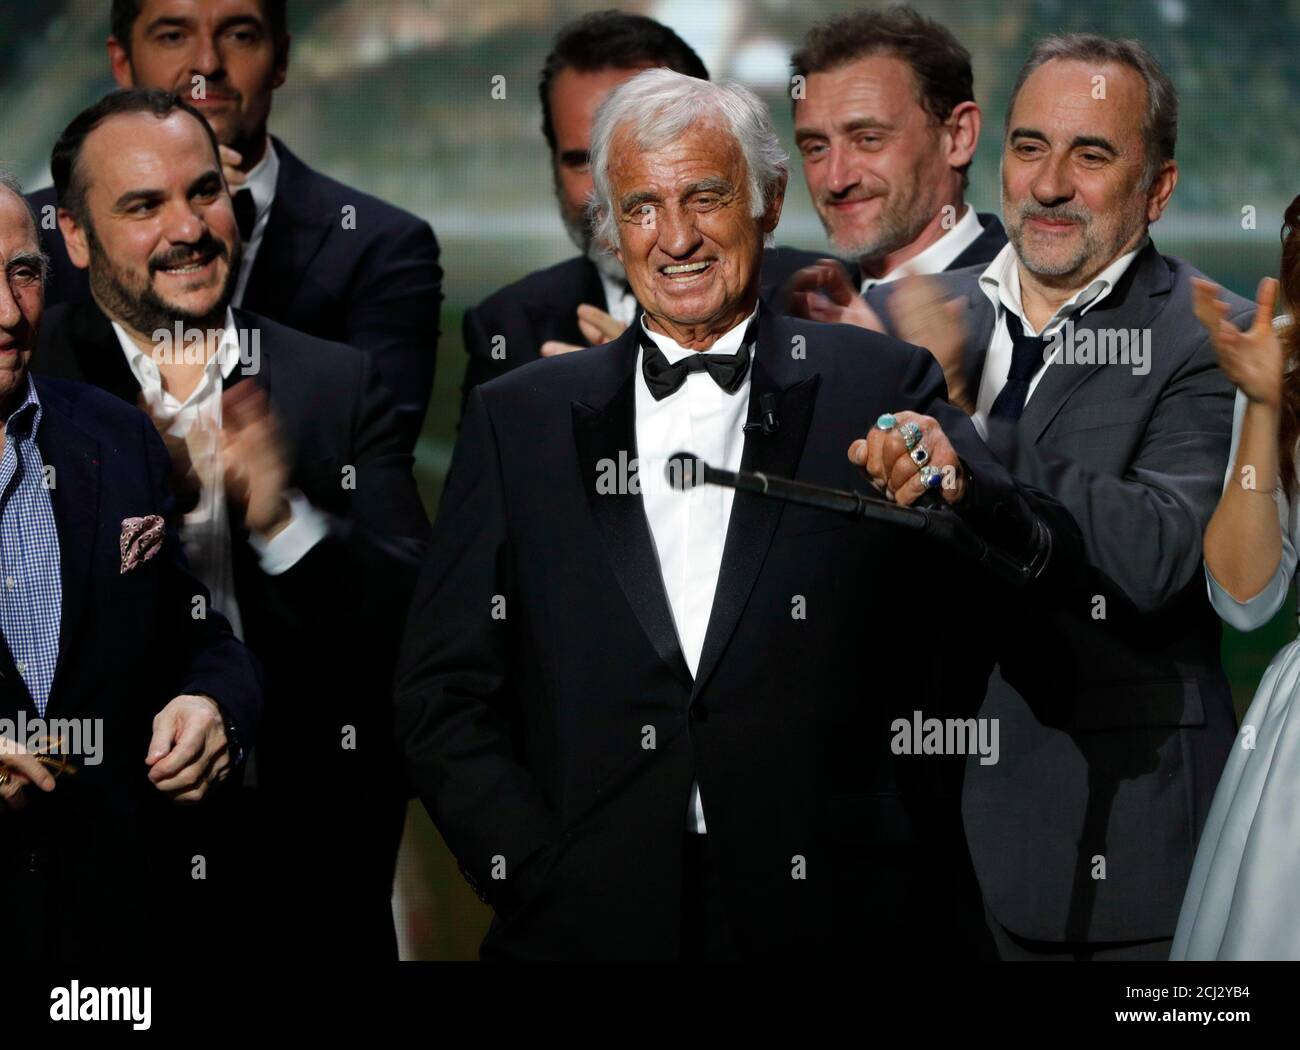 Actor Jean-Paul Belmondo reacts on stage as he receives an Honorary Cesar  Award at the 42nd Cesar Awards ceremony in Paris, France, February 24, 2017.  REUTERS/Philippe Wojazer Stock Photo - Alamy